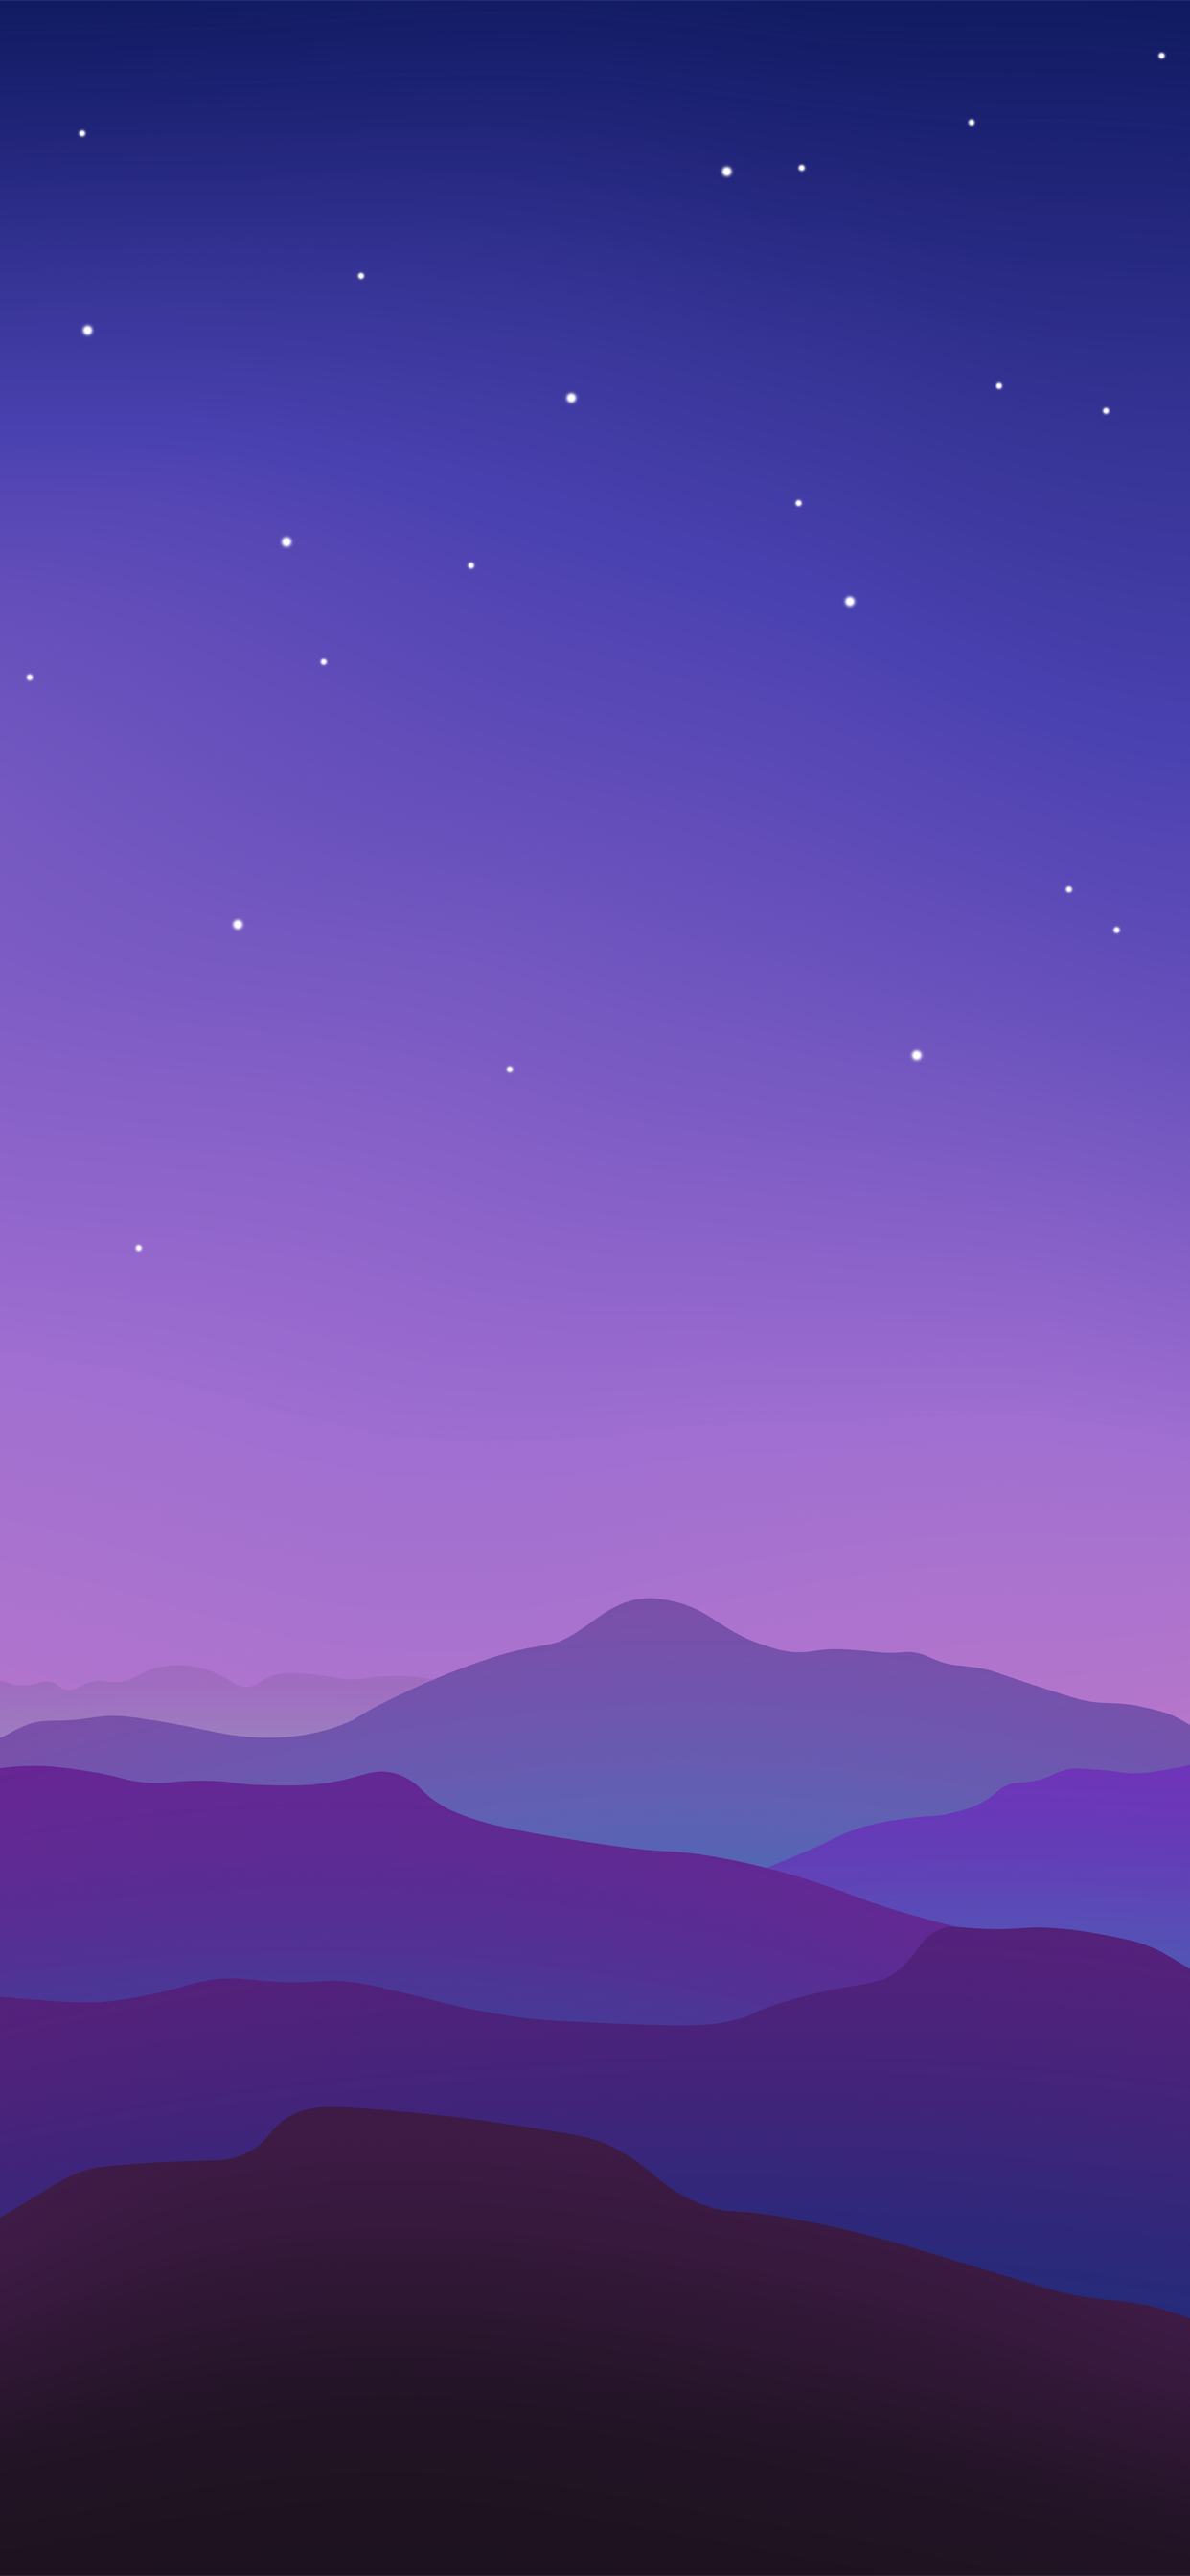 Colorful vector landscape wallpaper for iPhone